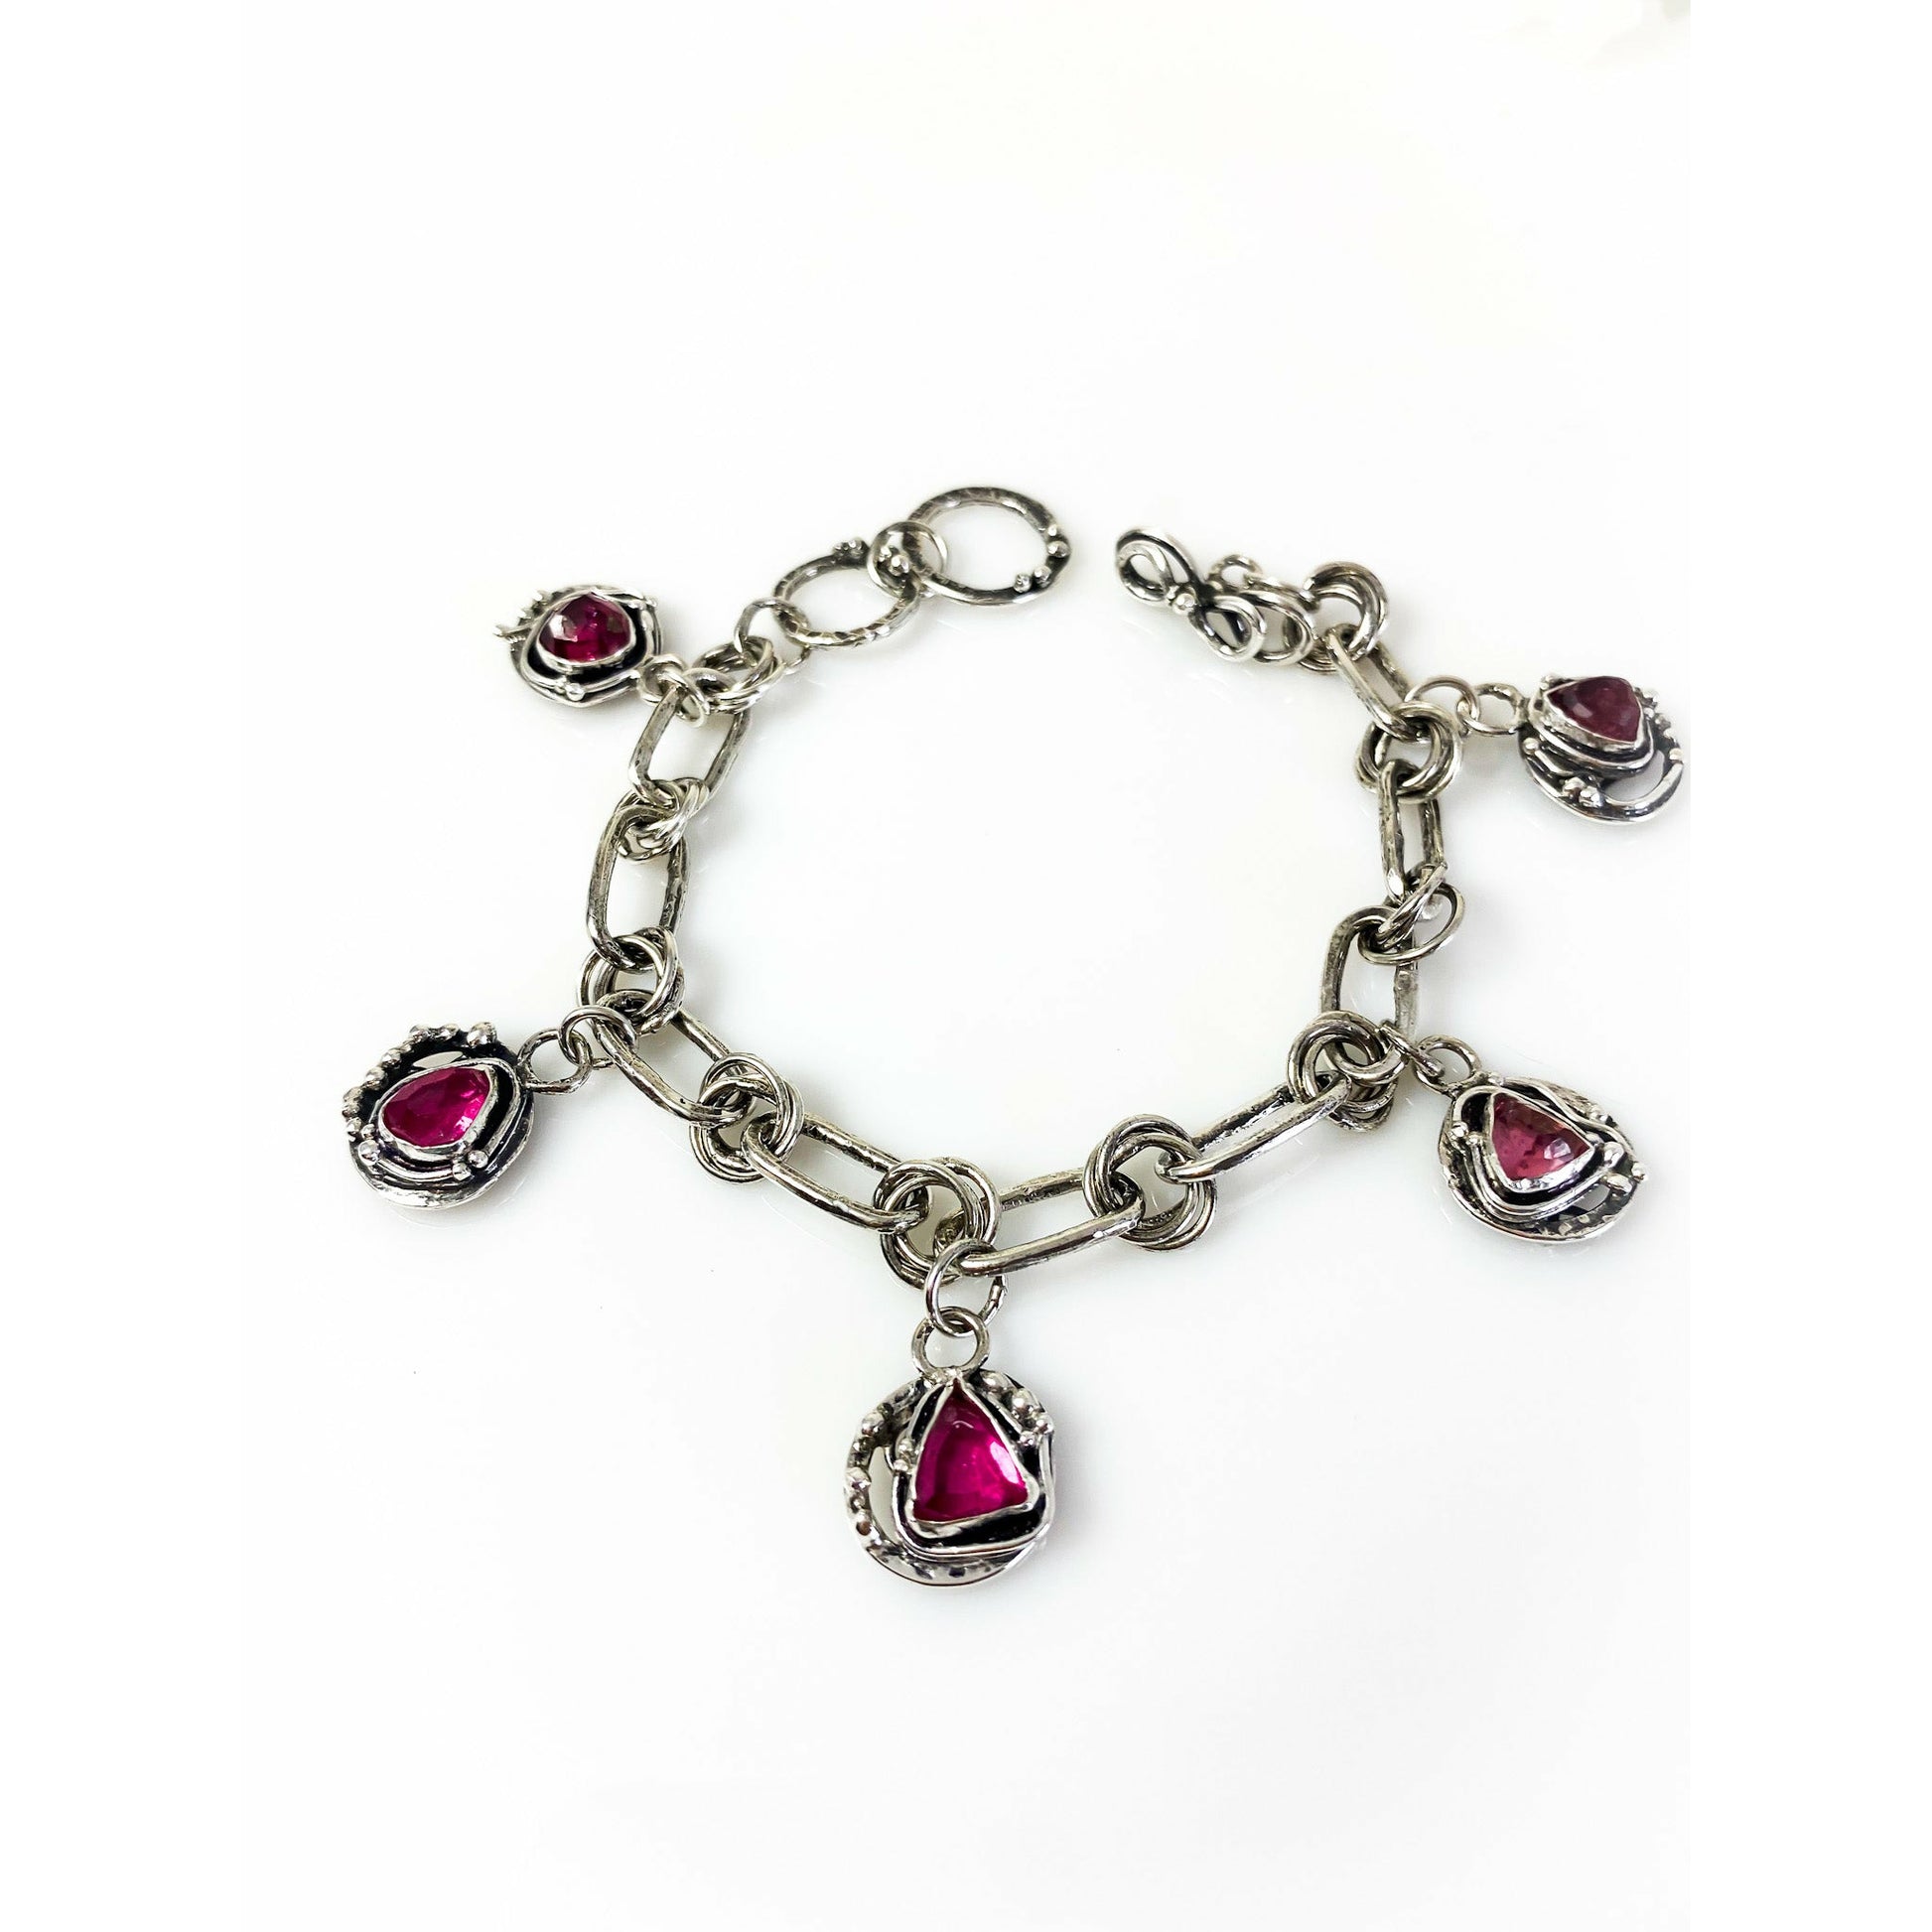 Pink tourmaline paperclip style chain and charm bracelet